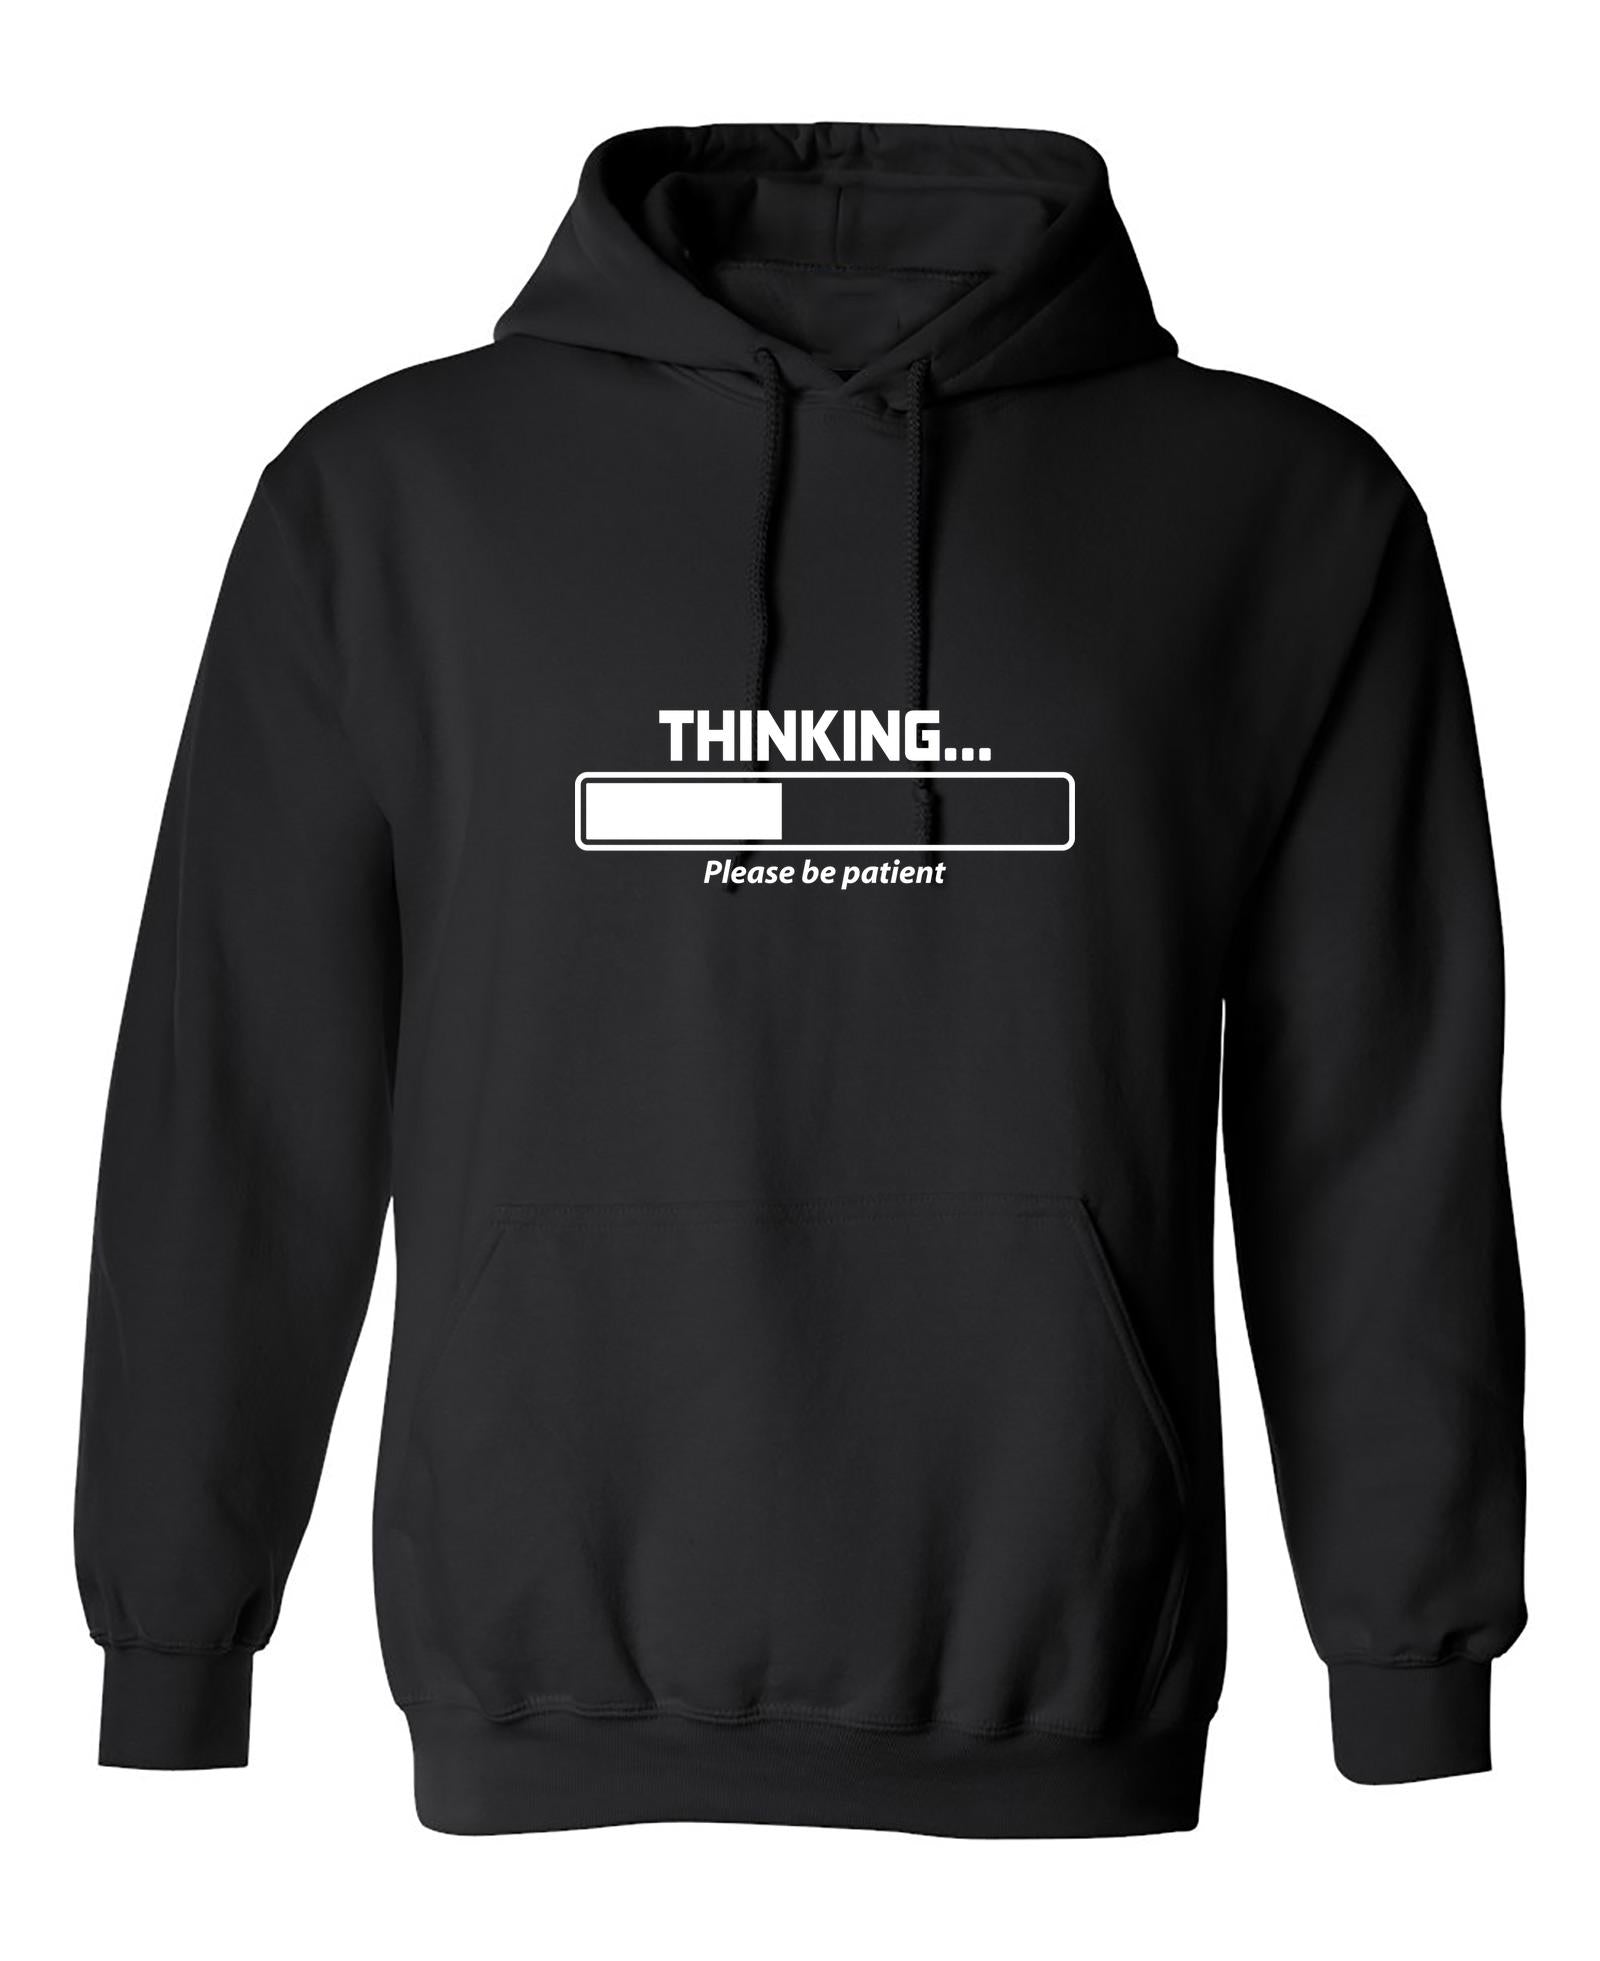 Funny T-Shirts design "PS_0218_THINKING_PATIENT"